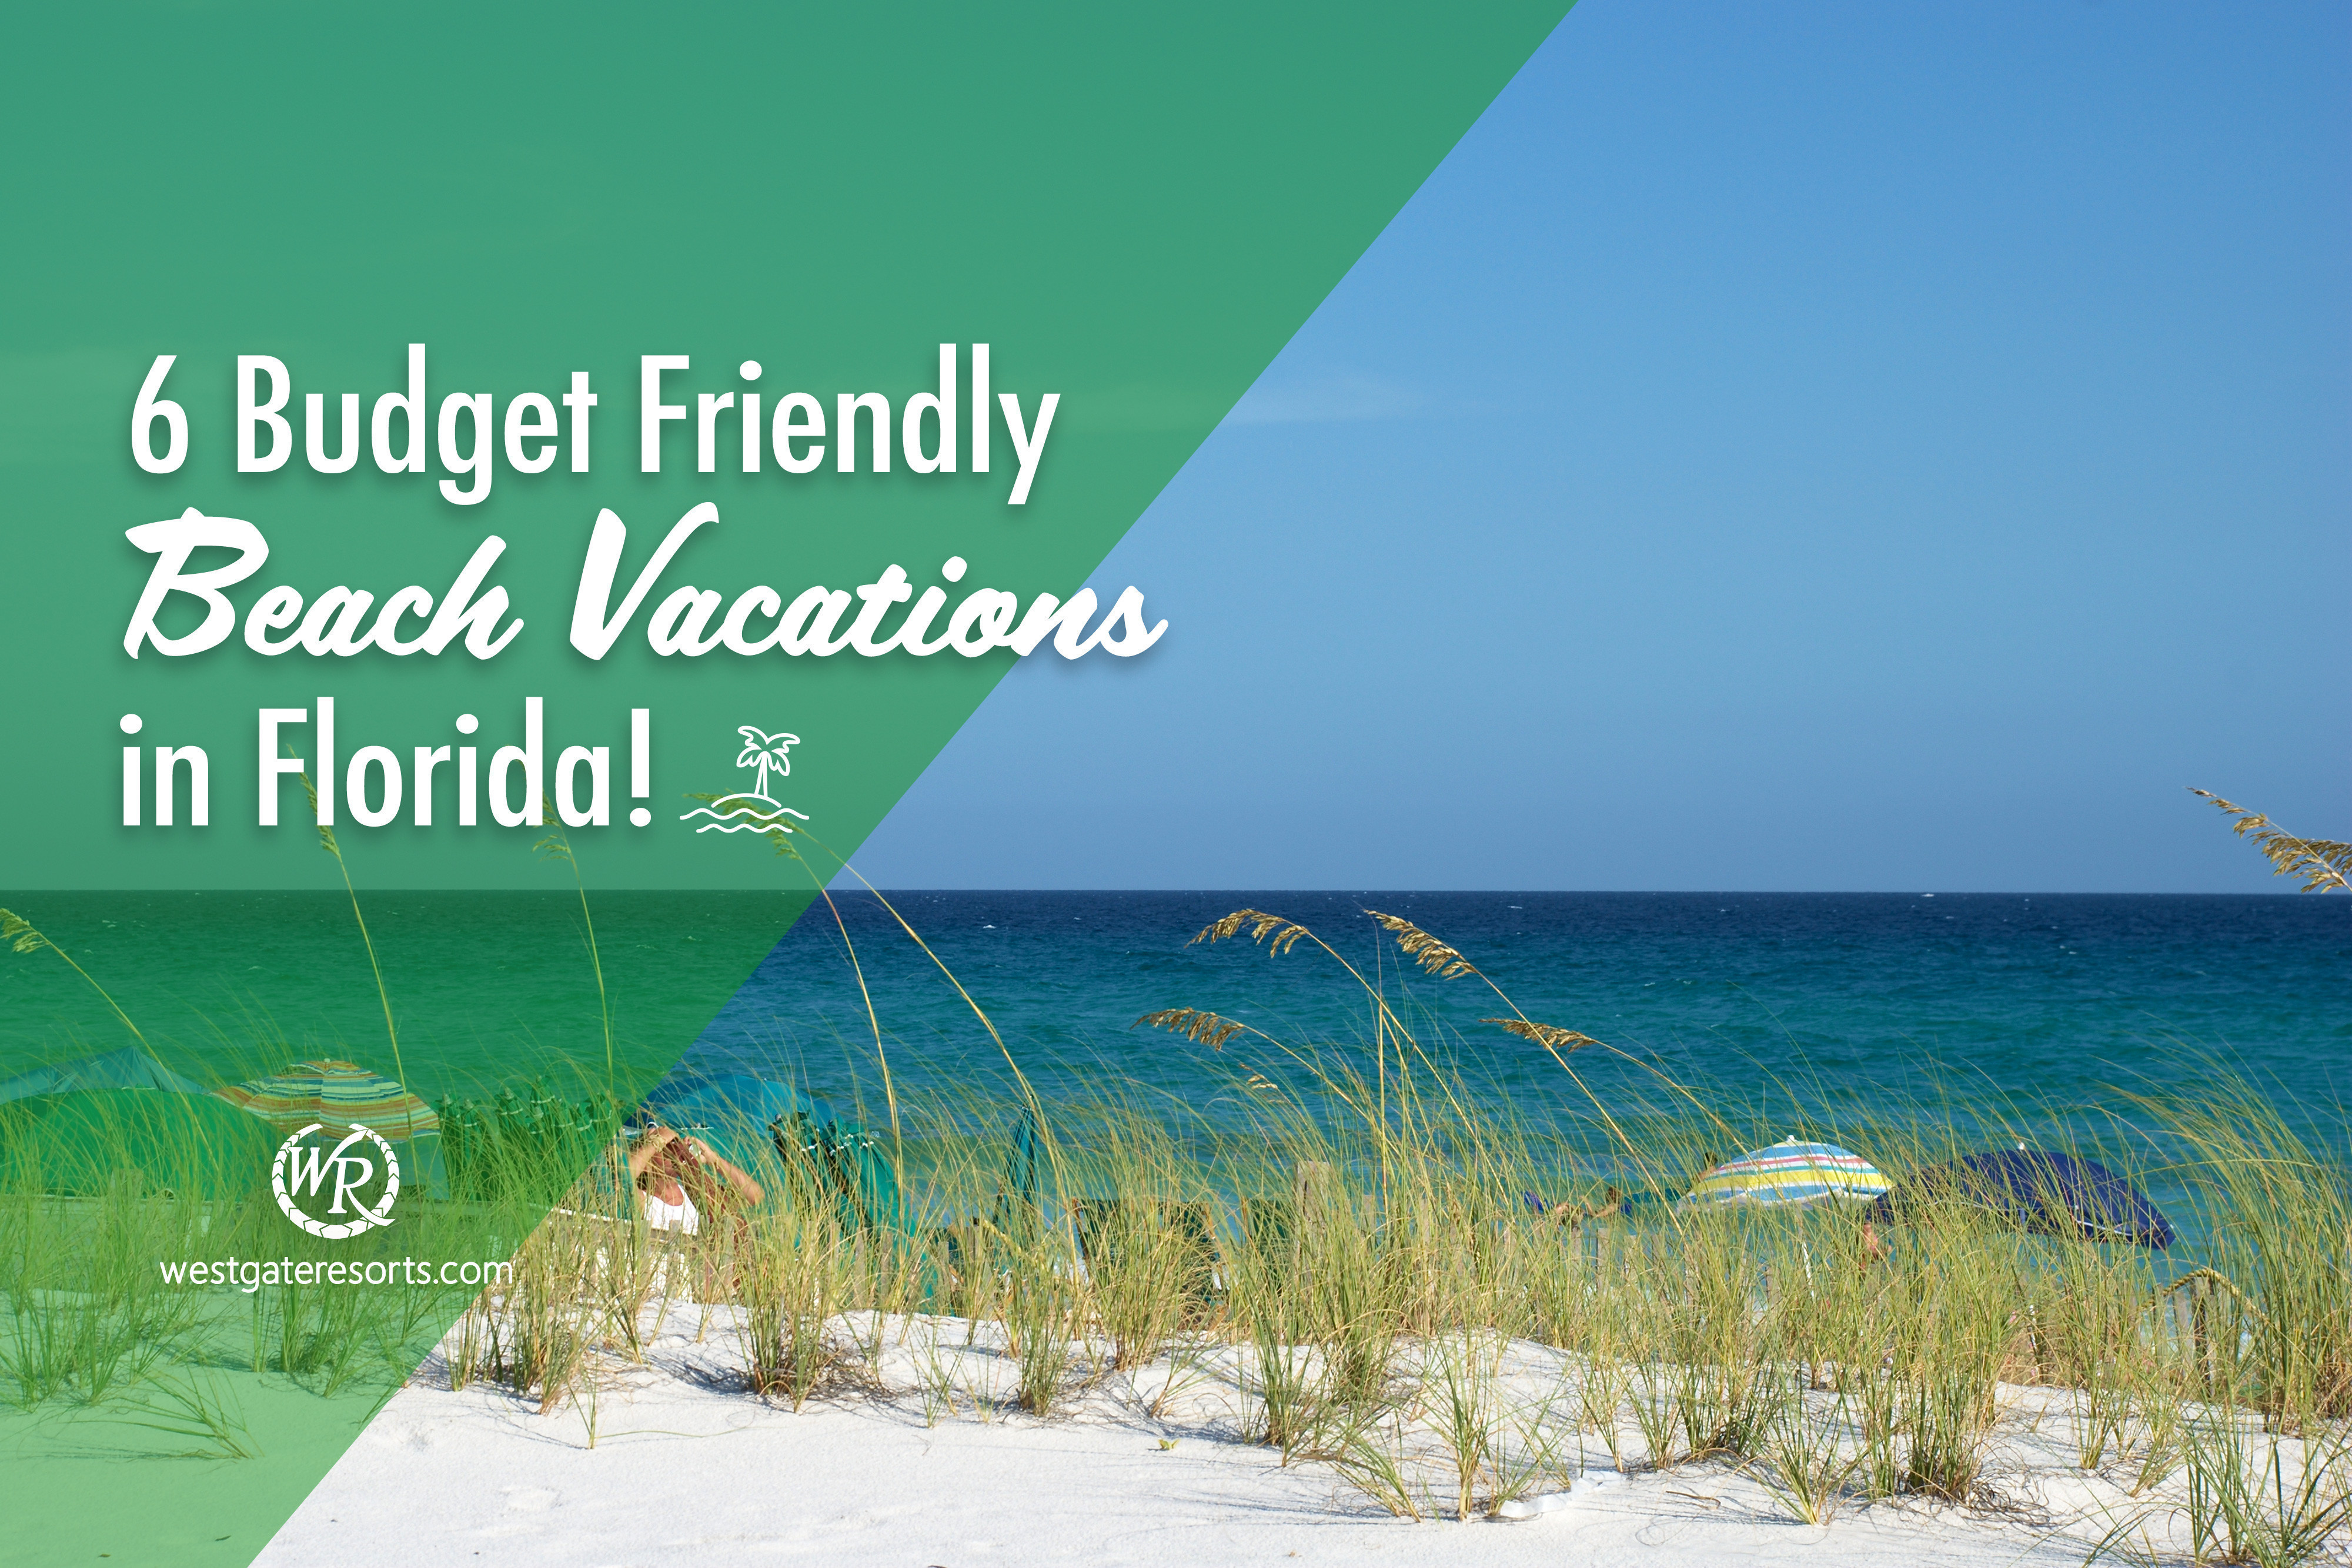 20 Budget Friendly Beach Vacations in Florida